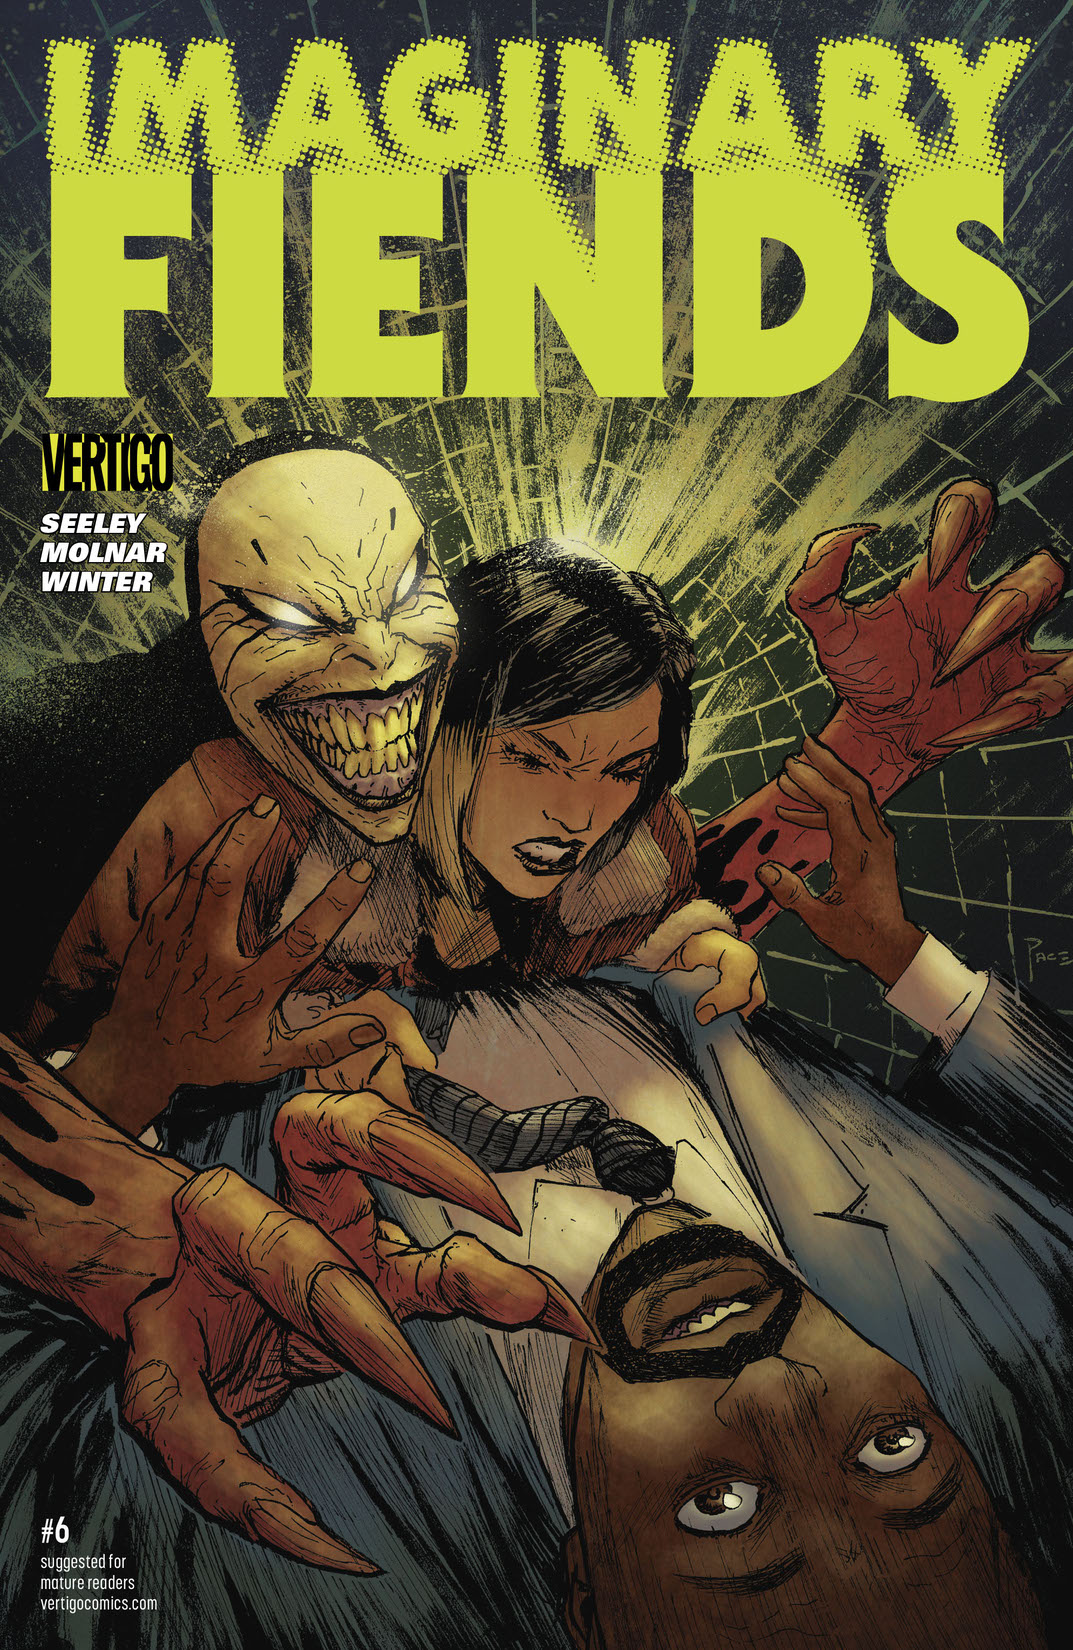 Imaginary Fiends #6 preview images